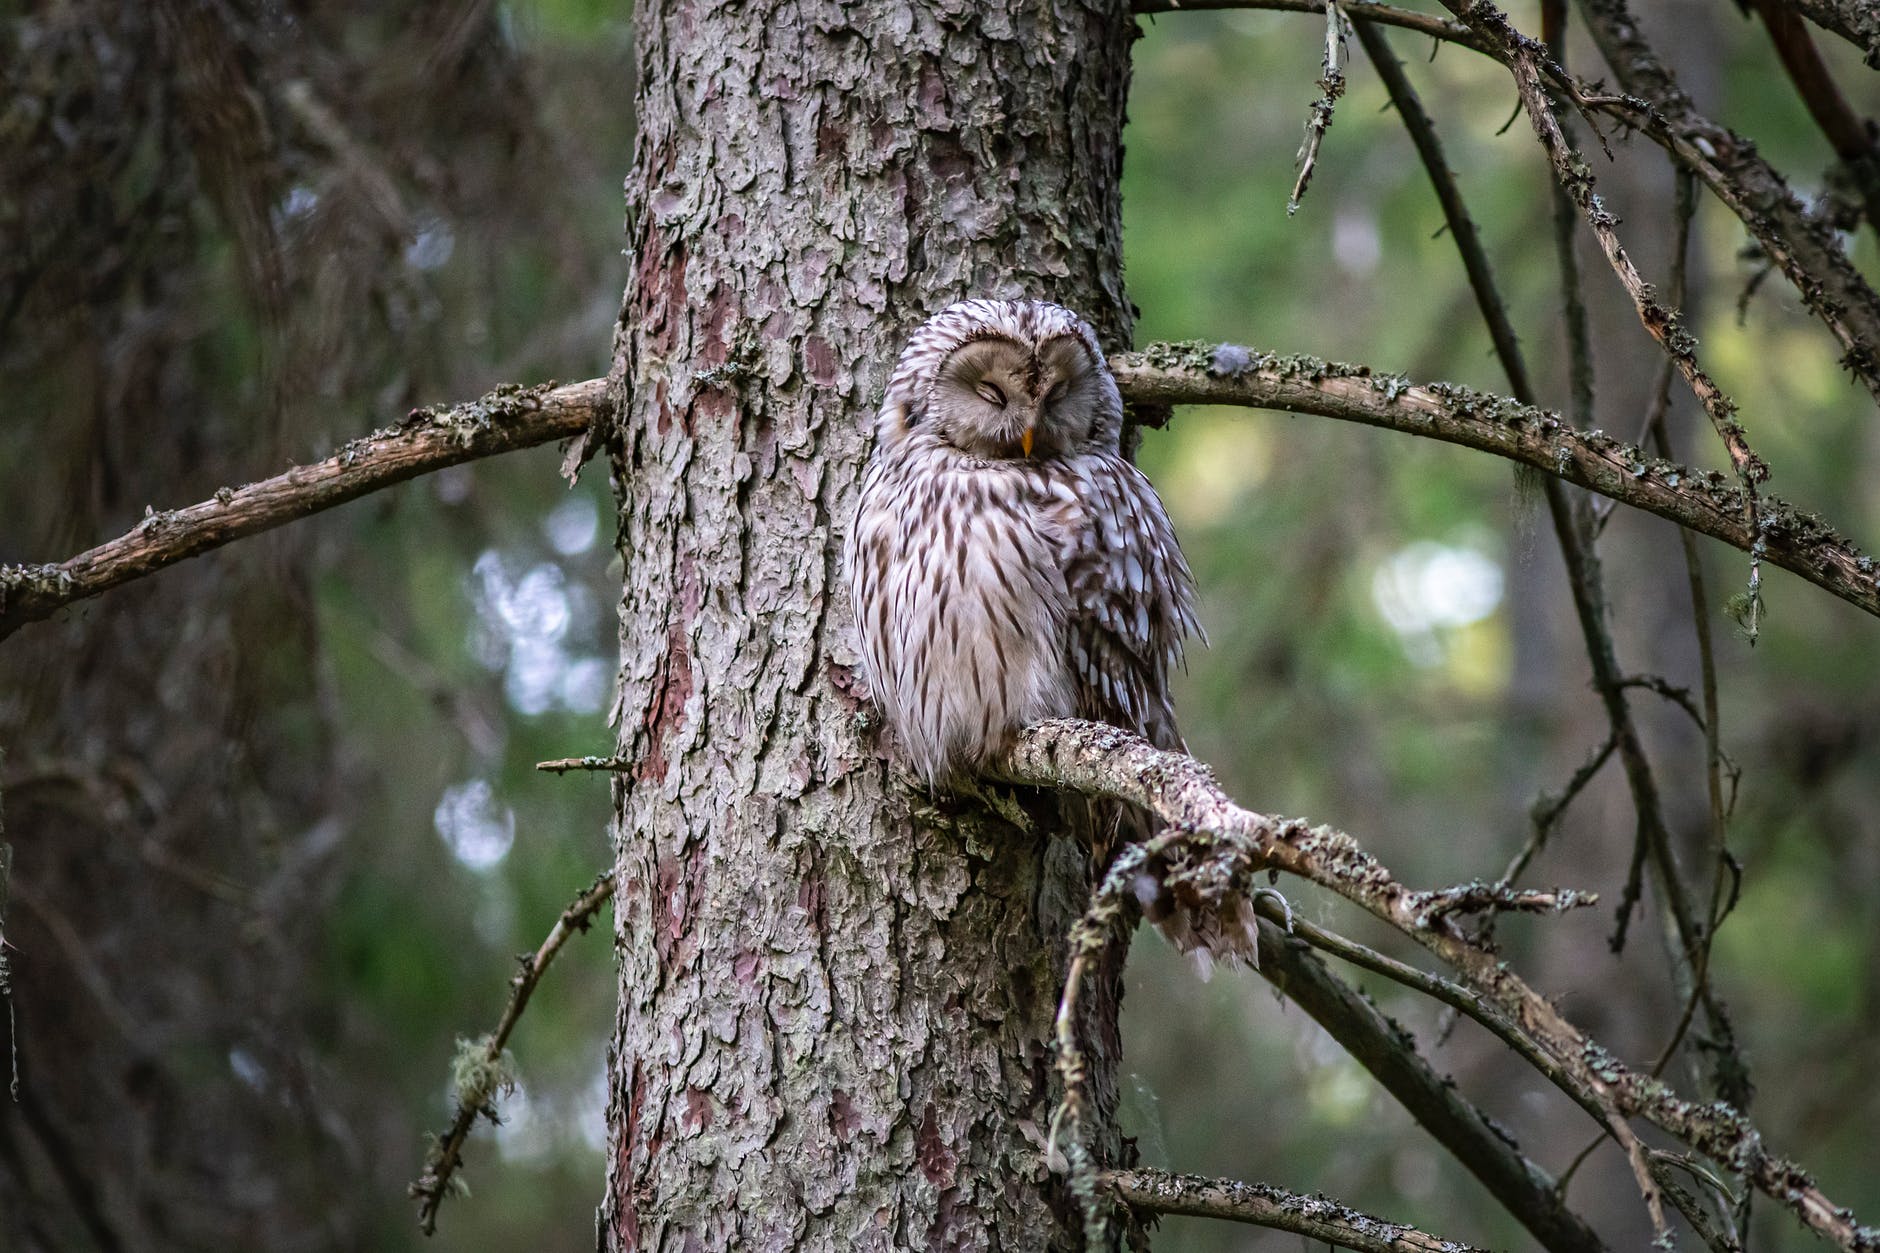 photo of white and brown owl perched on a tree branch